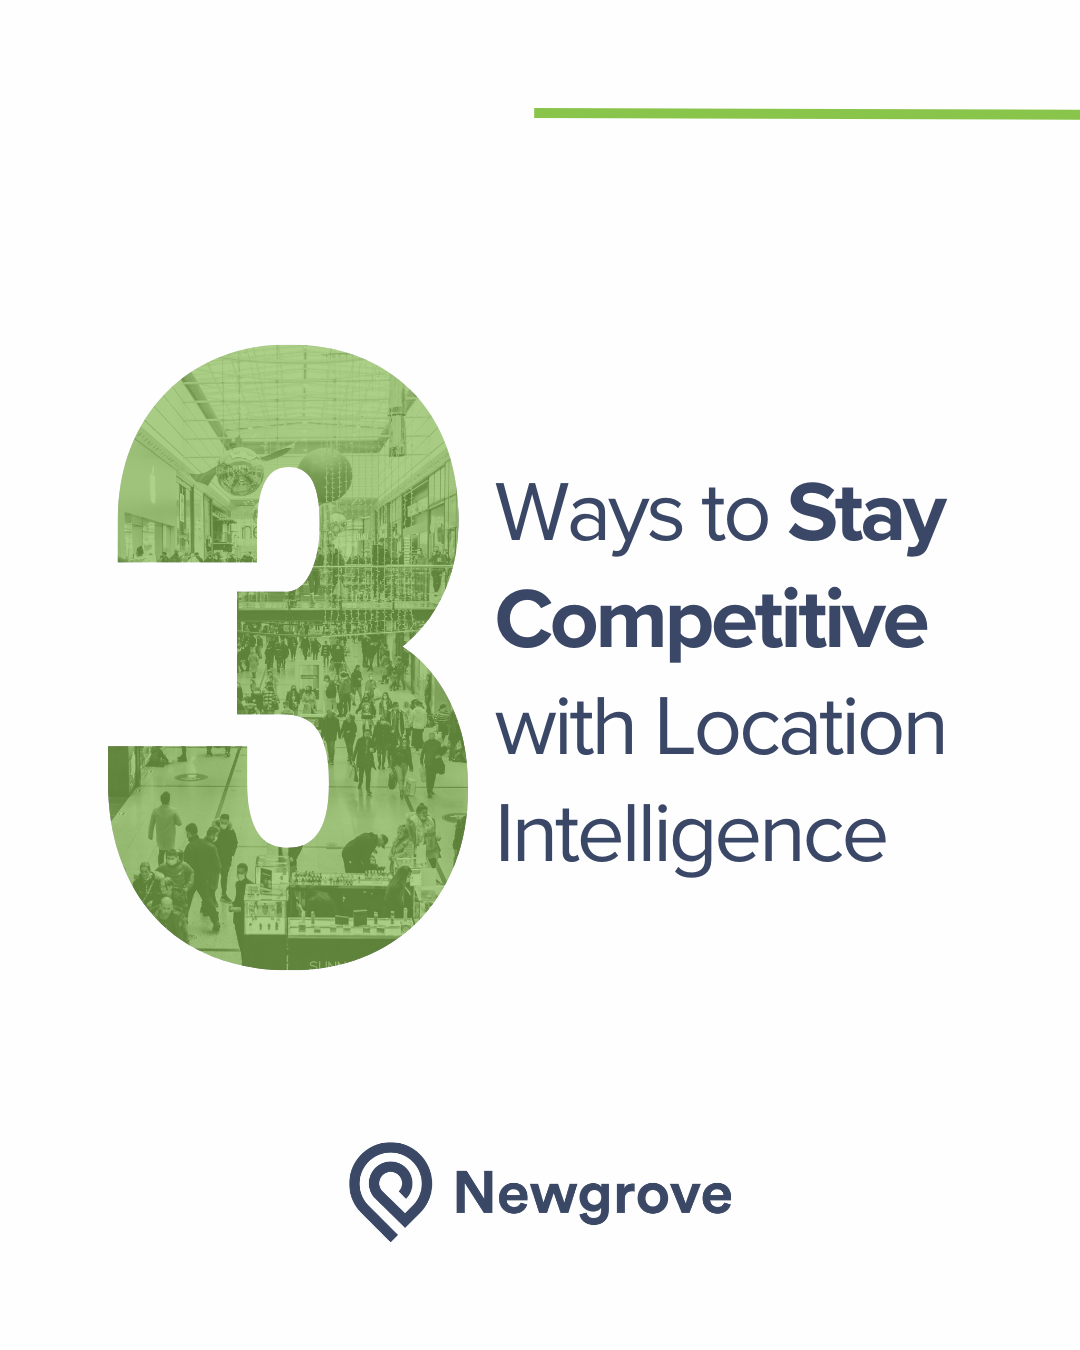 3 Ways to Stay Competitive with Location Intelligence